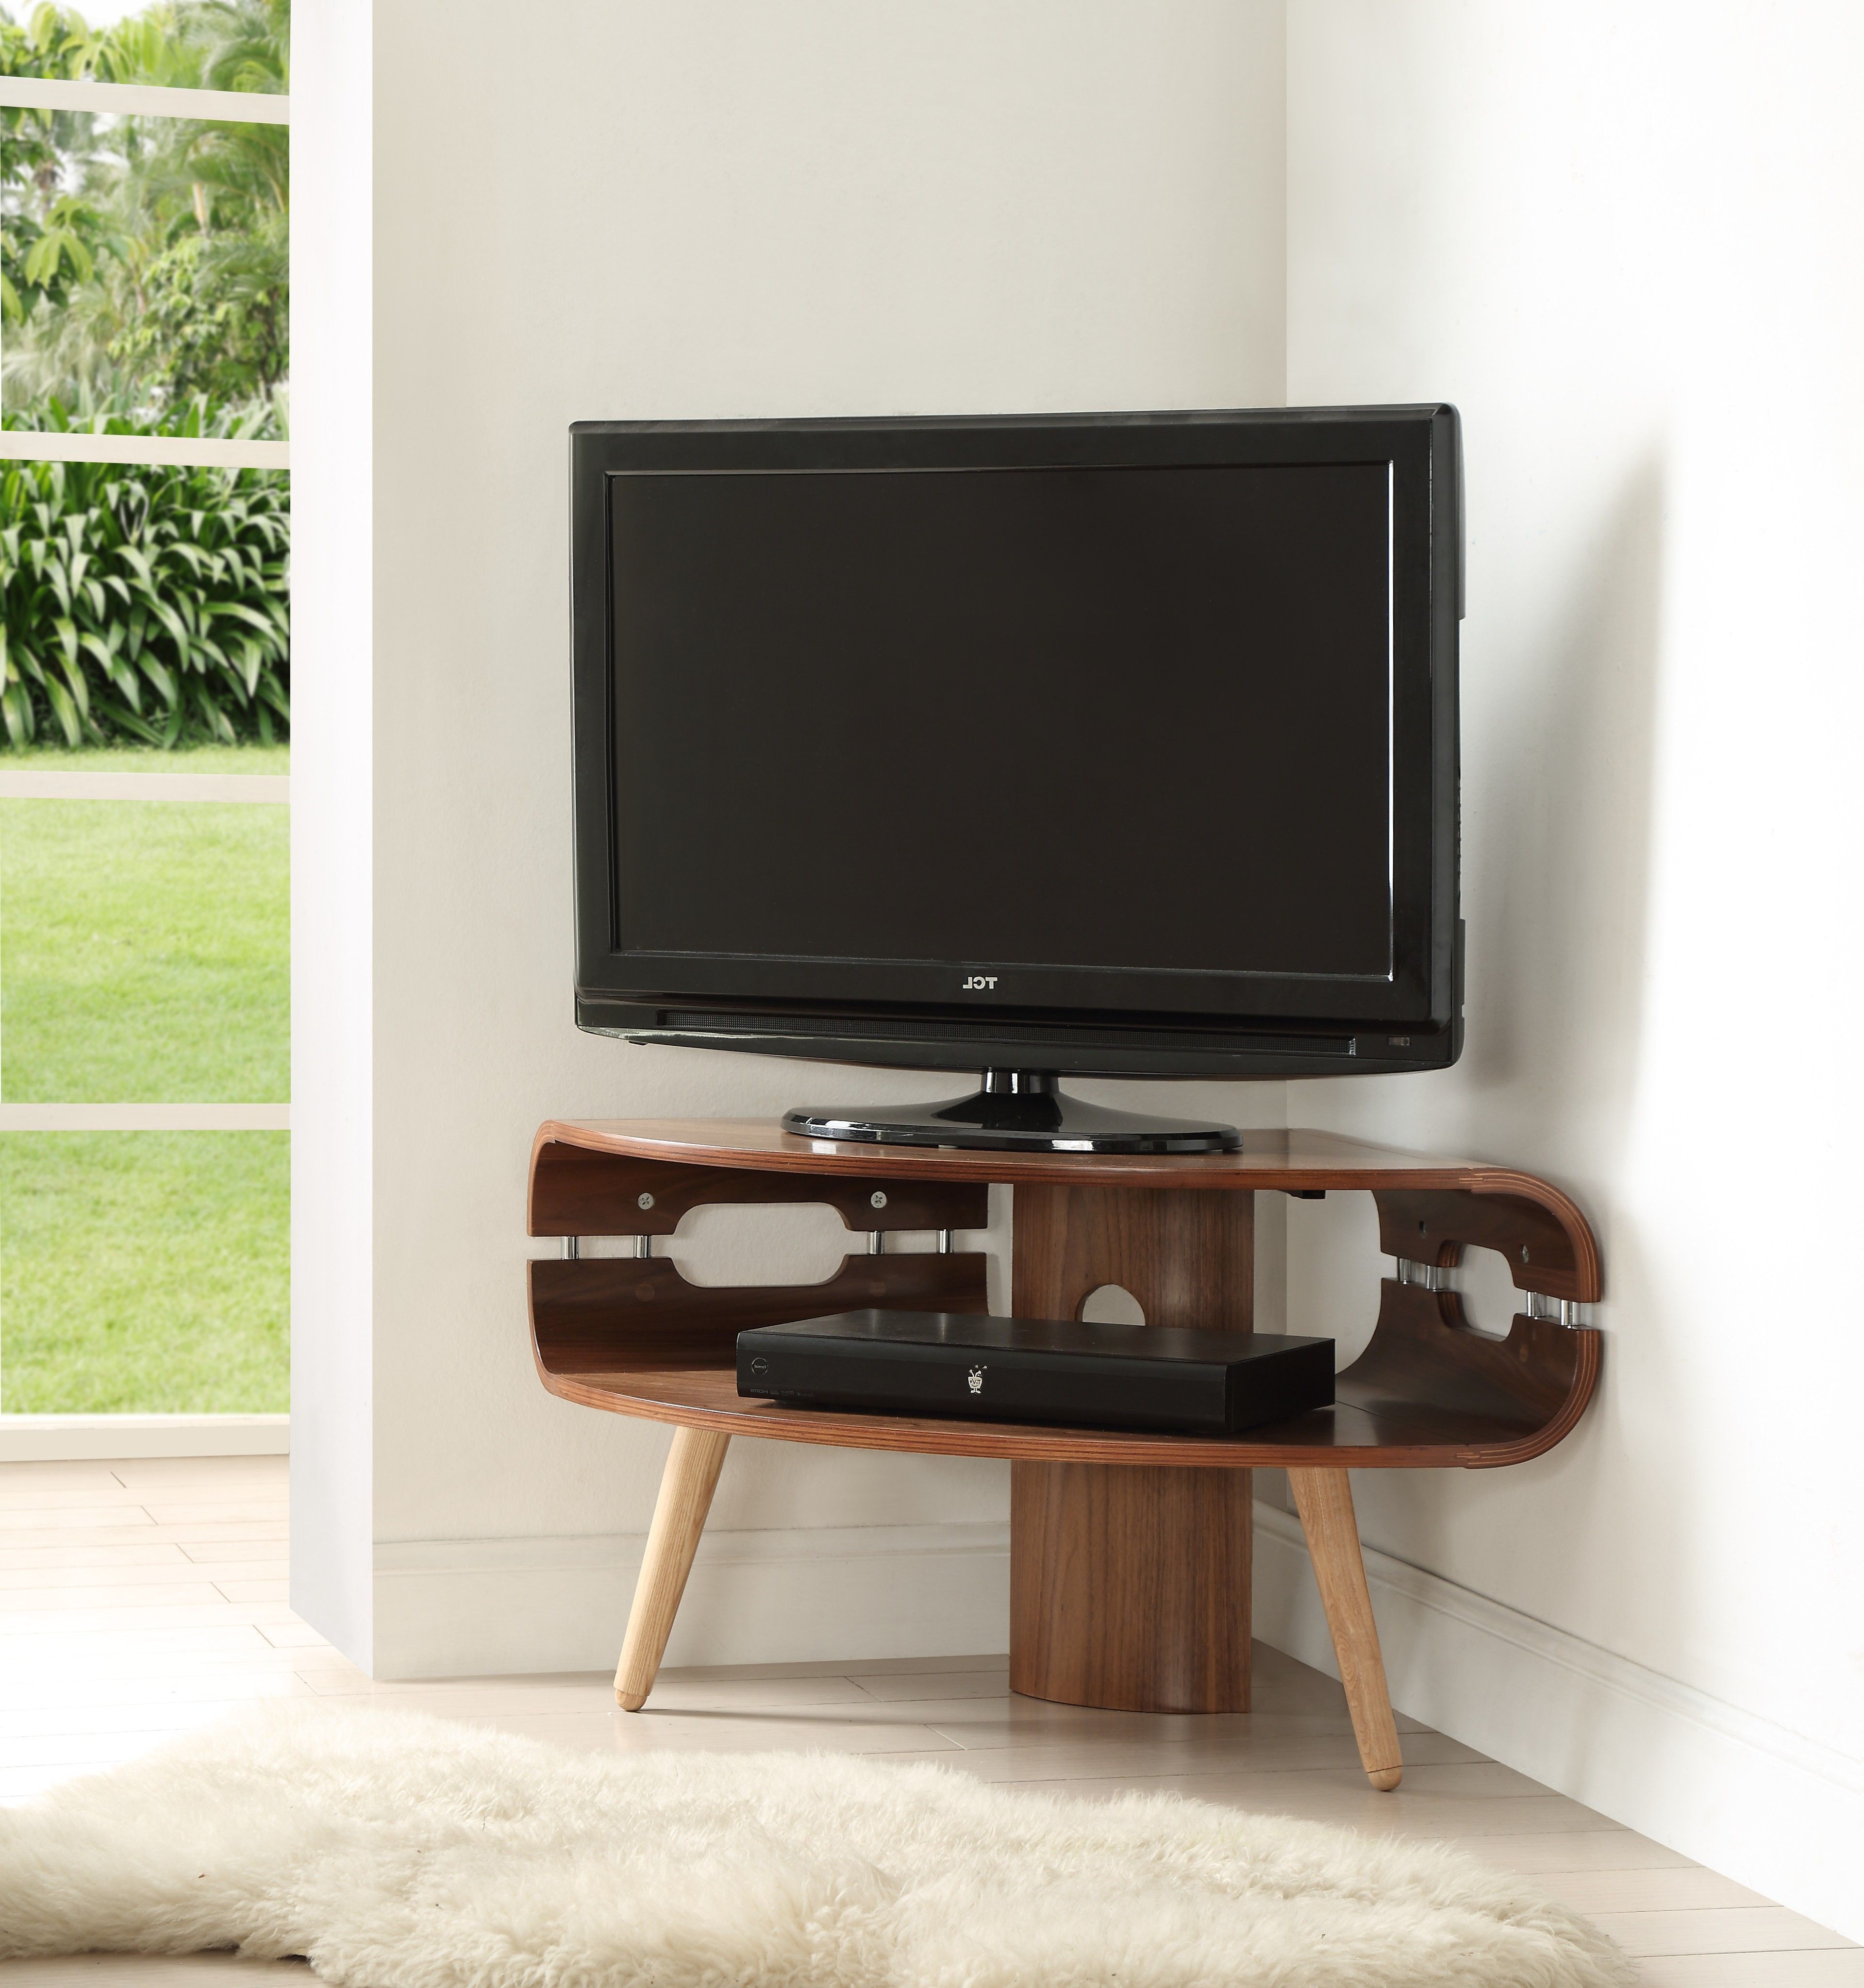 Small Oak Corner Tv Stands Intended For Popular Jf701 Corner Tv Stand (View 17 of 20)